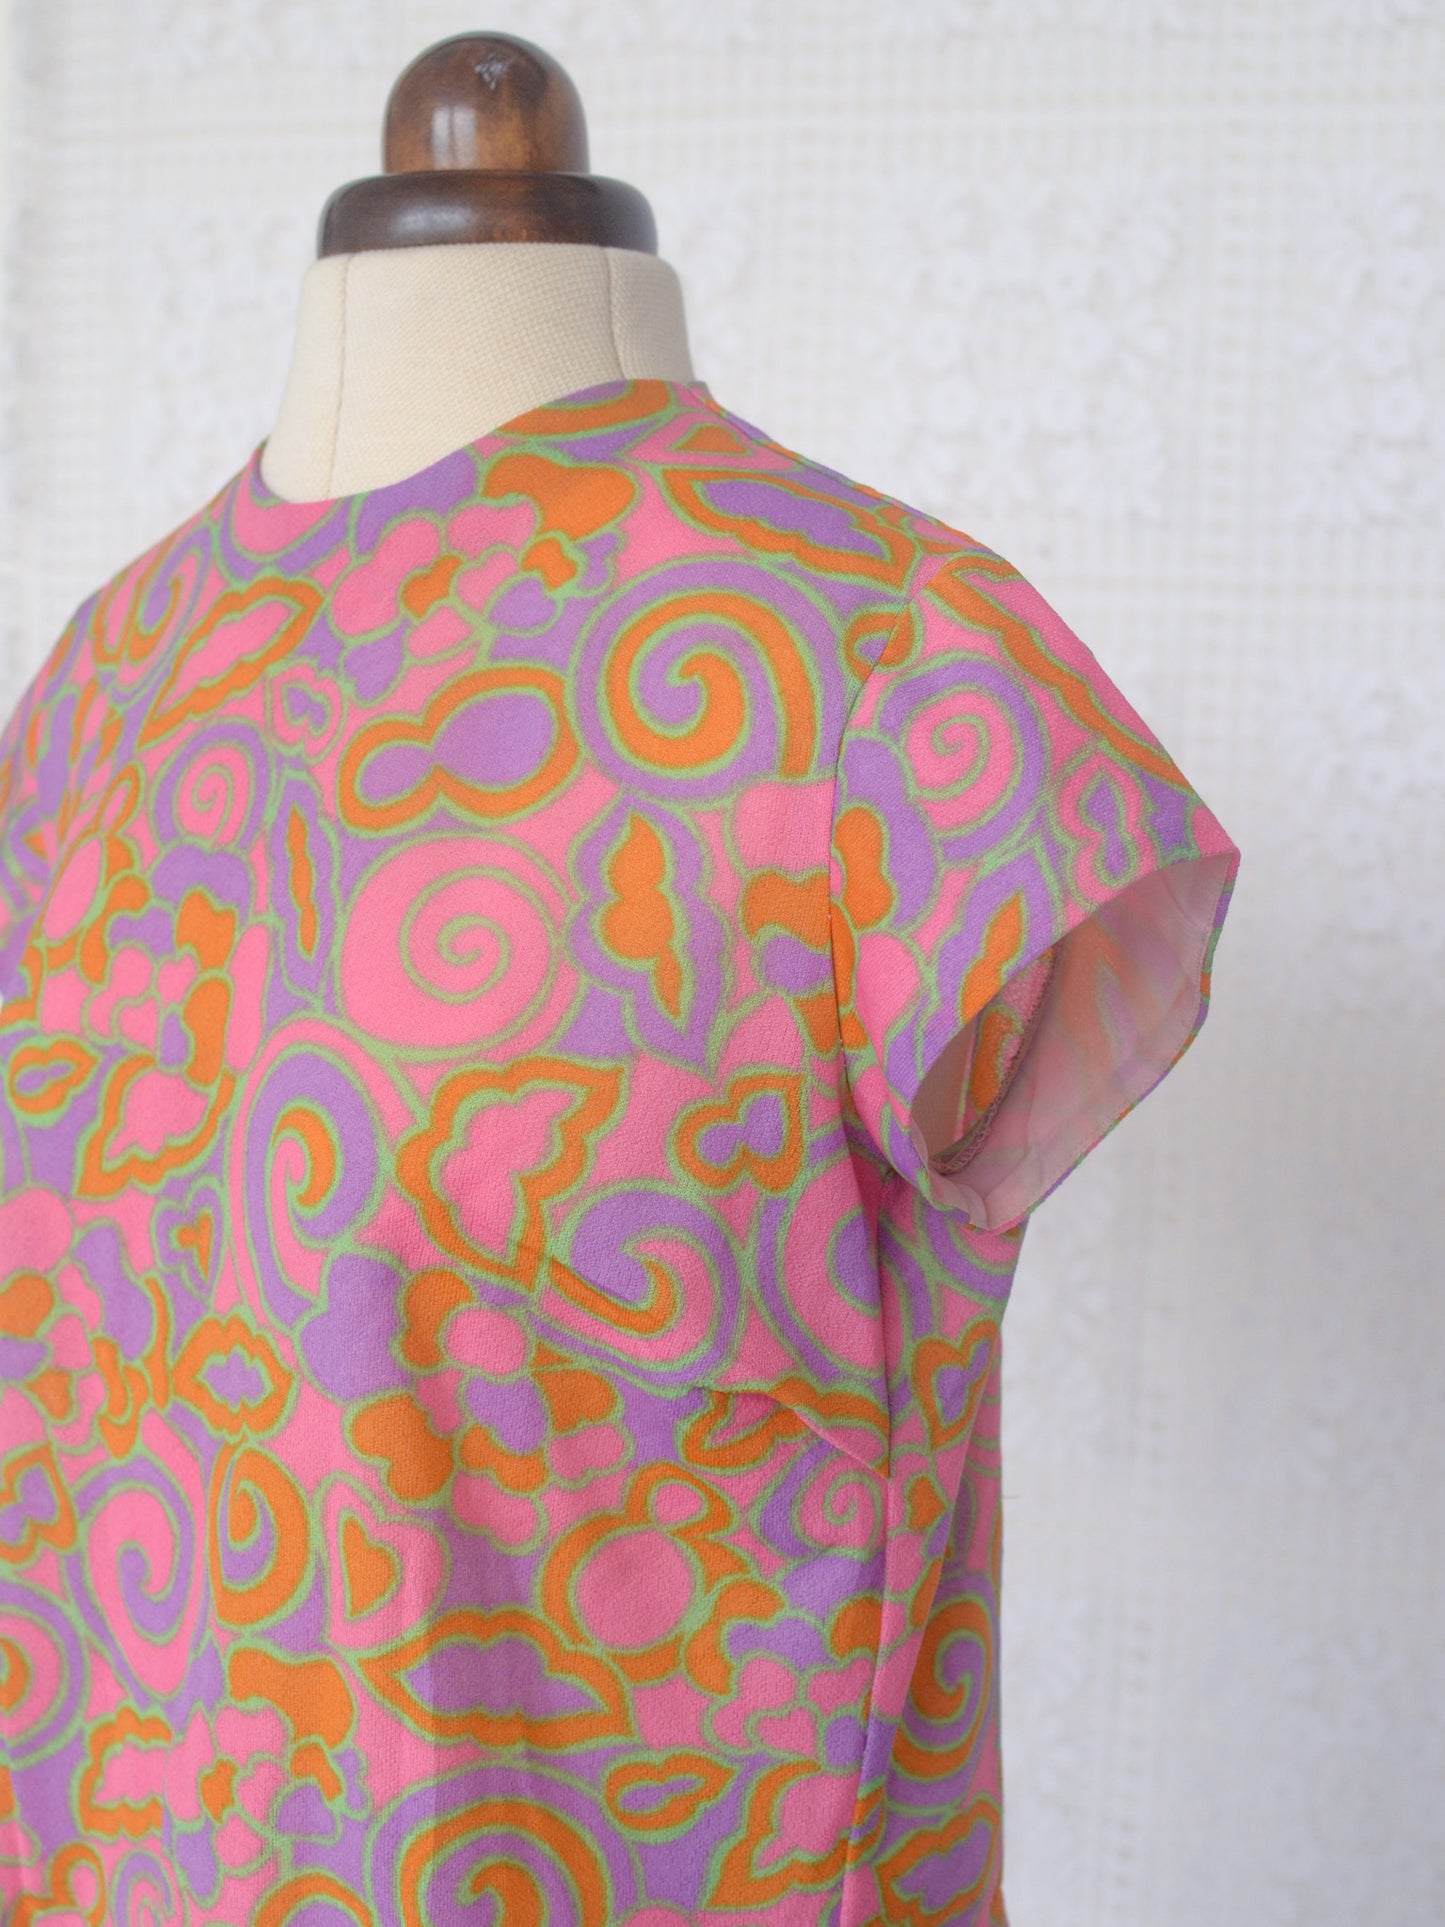 1960s psychedelic pink purple and orange cropped sleeveless top